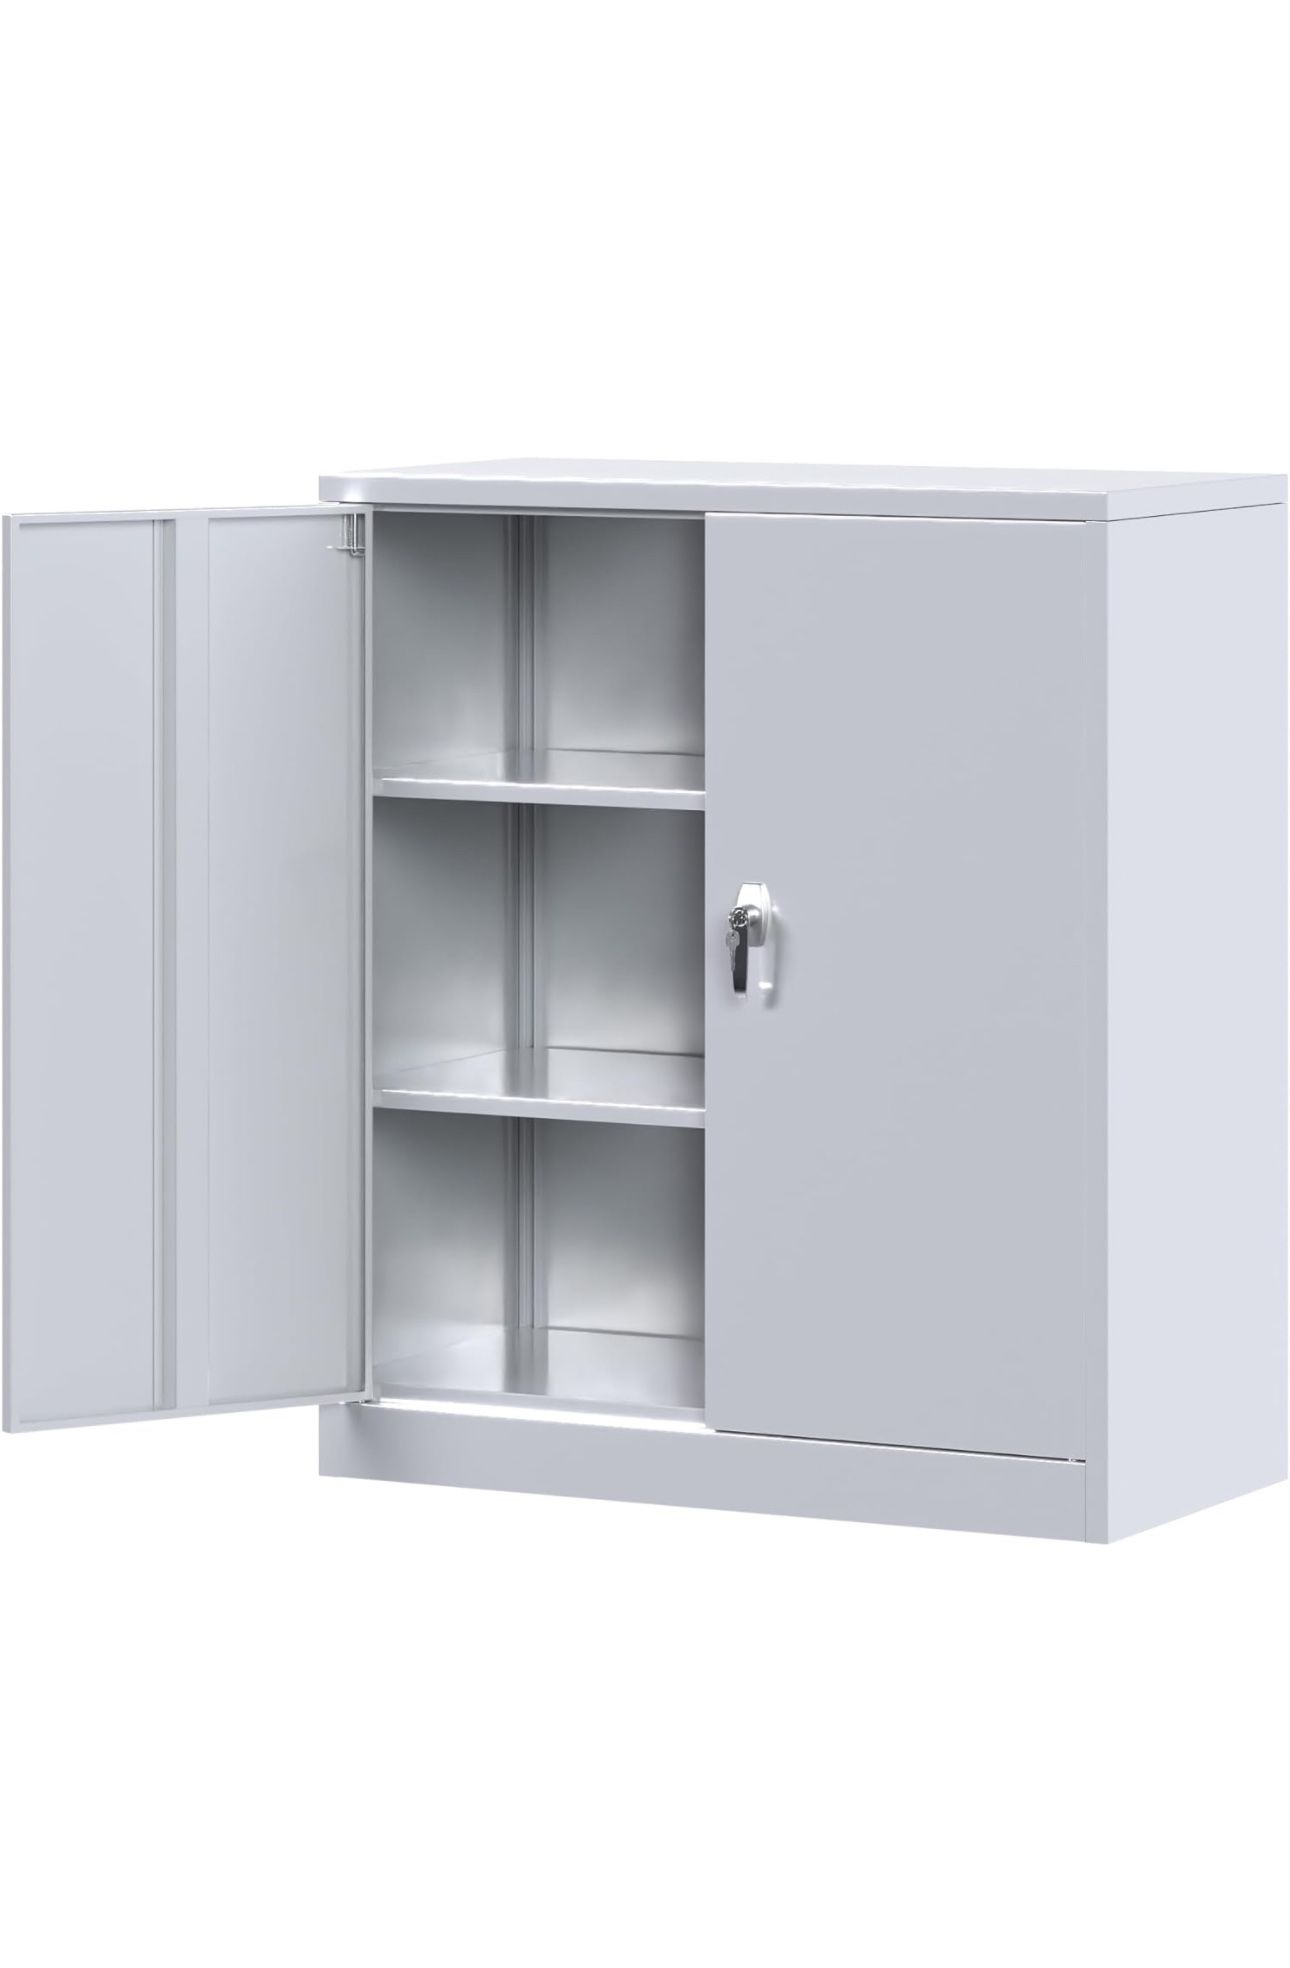 Brand New Metal Storage Cabinets with Lock,2 Doors and 2 Adjustable Shelves - 35.4" Steel Lockable File Cabinet,Locking Counter Cabinet for Home Offic